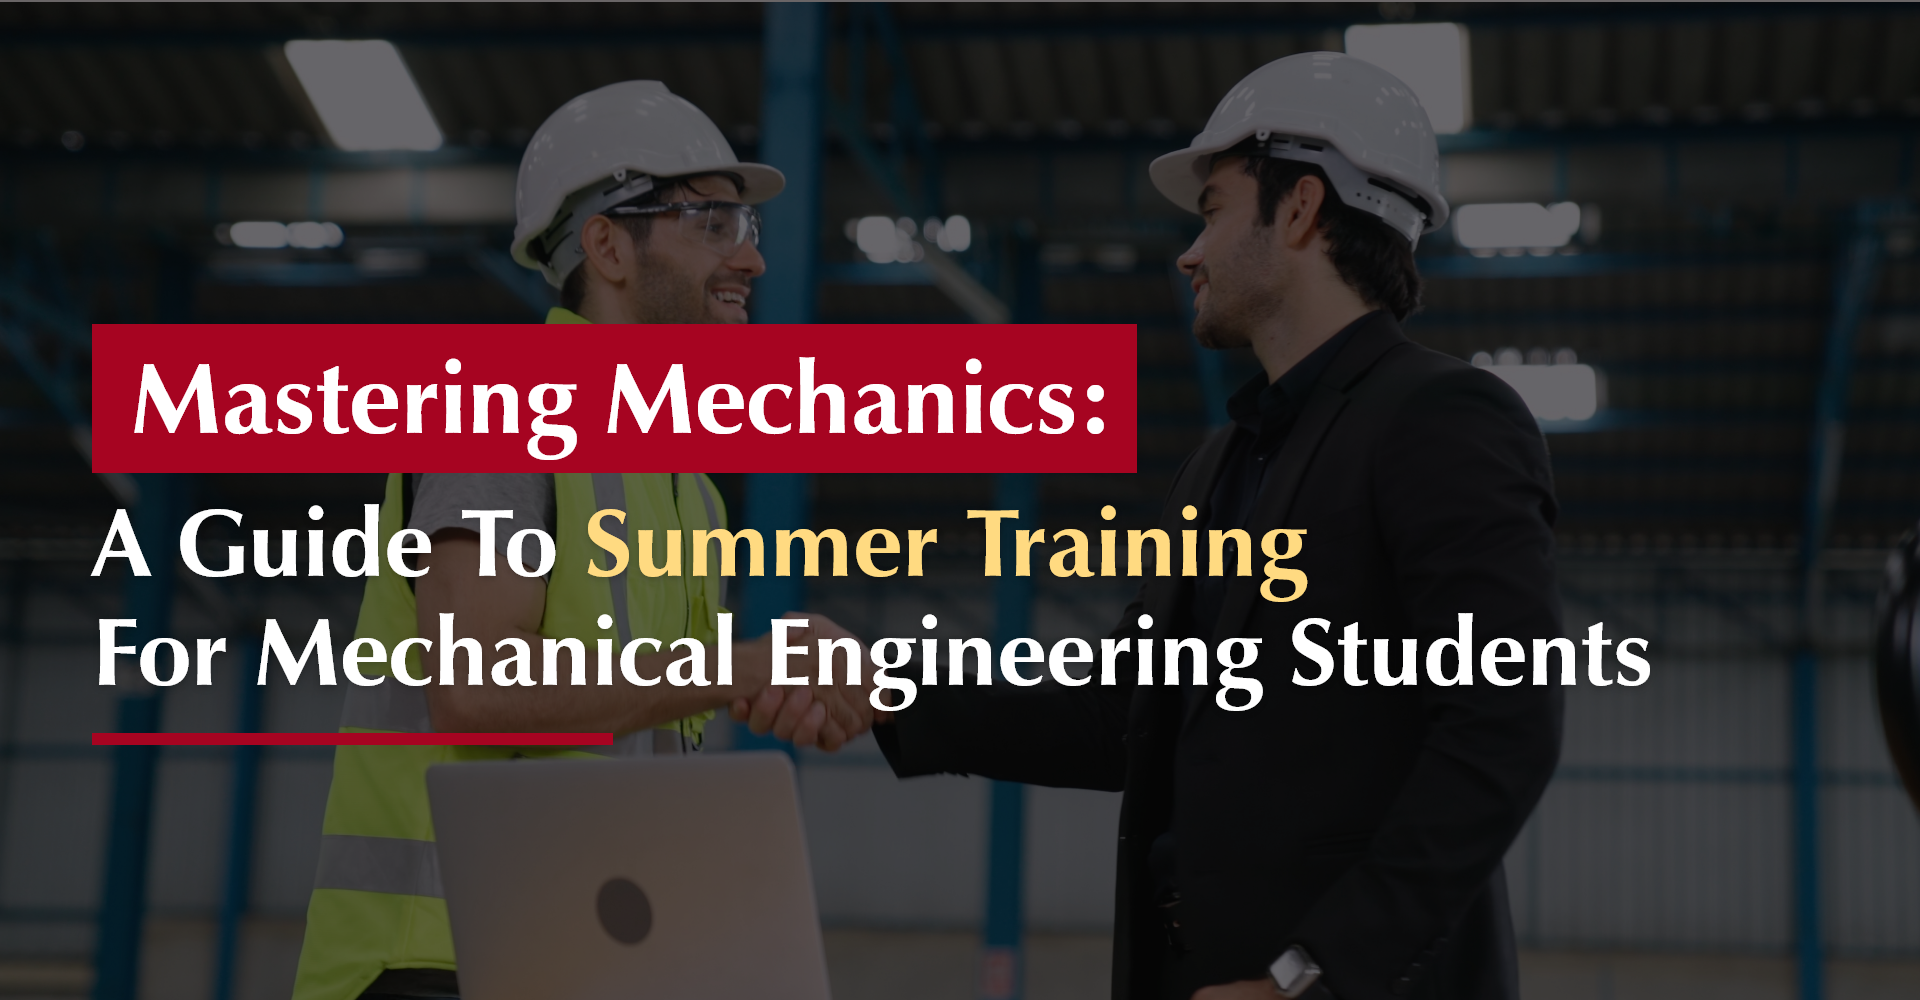 Mastering Mechanics: A Guide to Summer Training for Mechanical Engineering Students